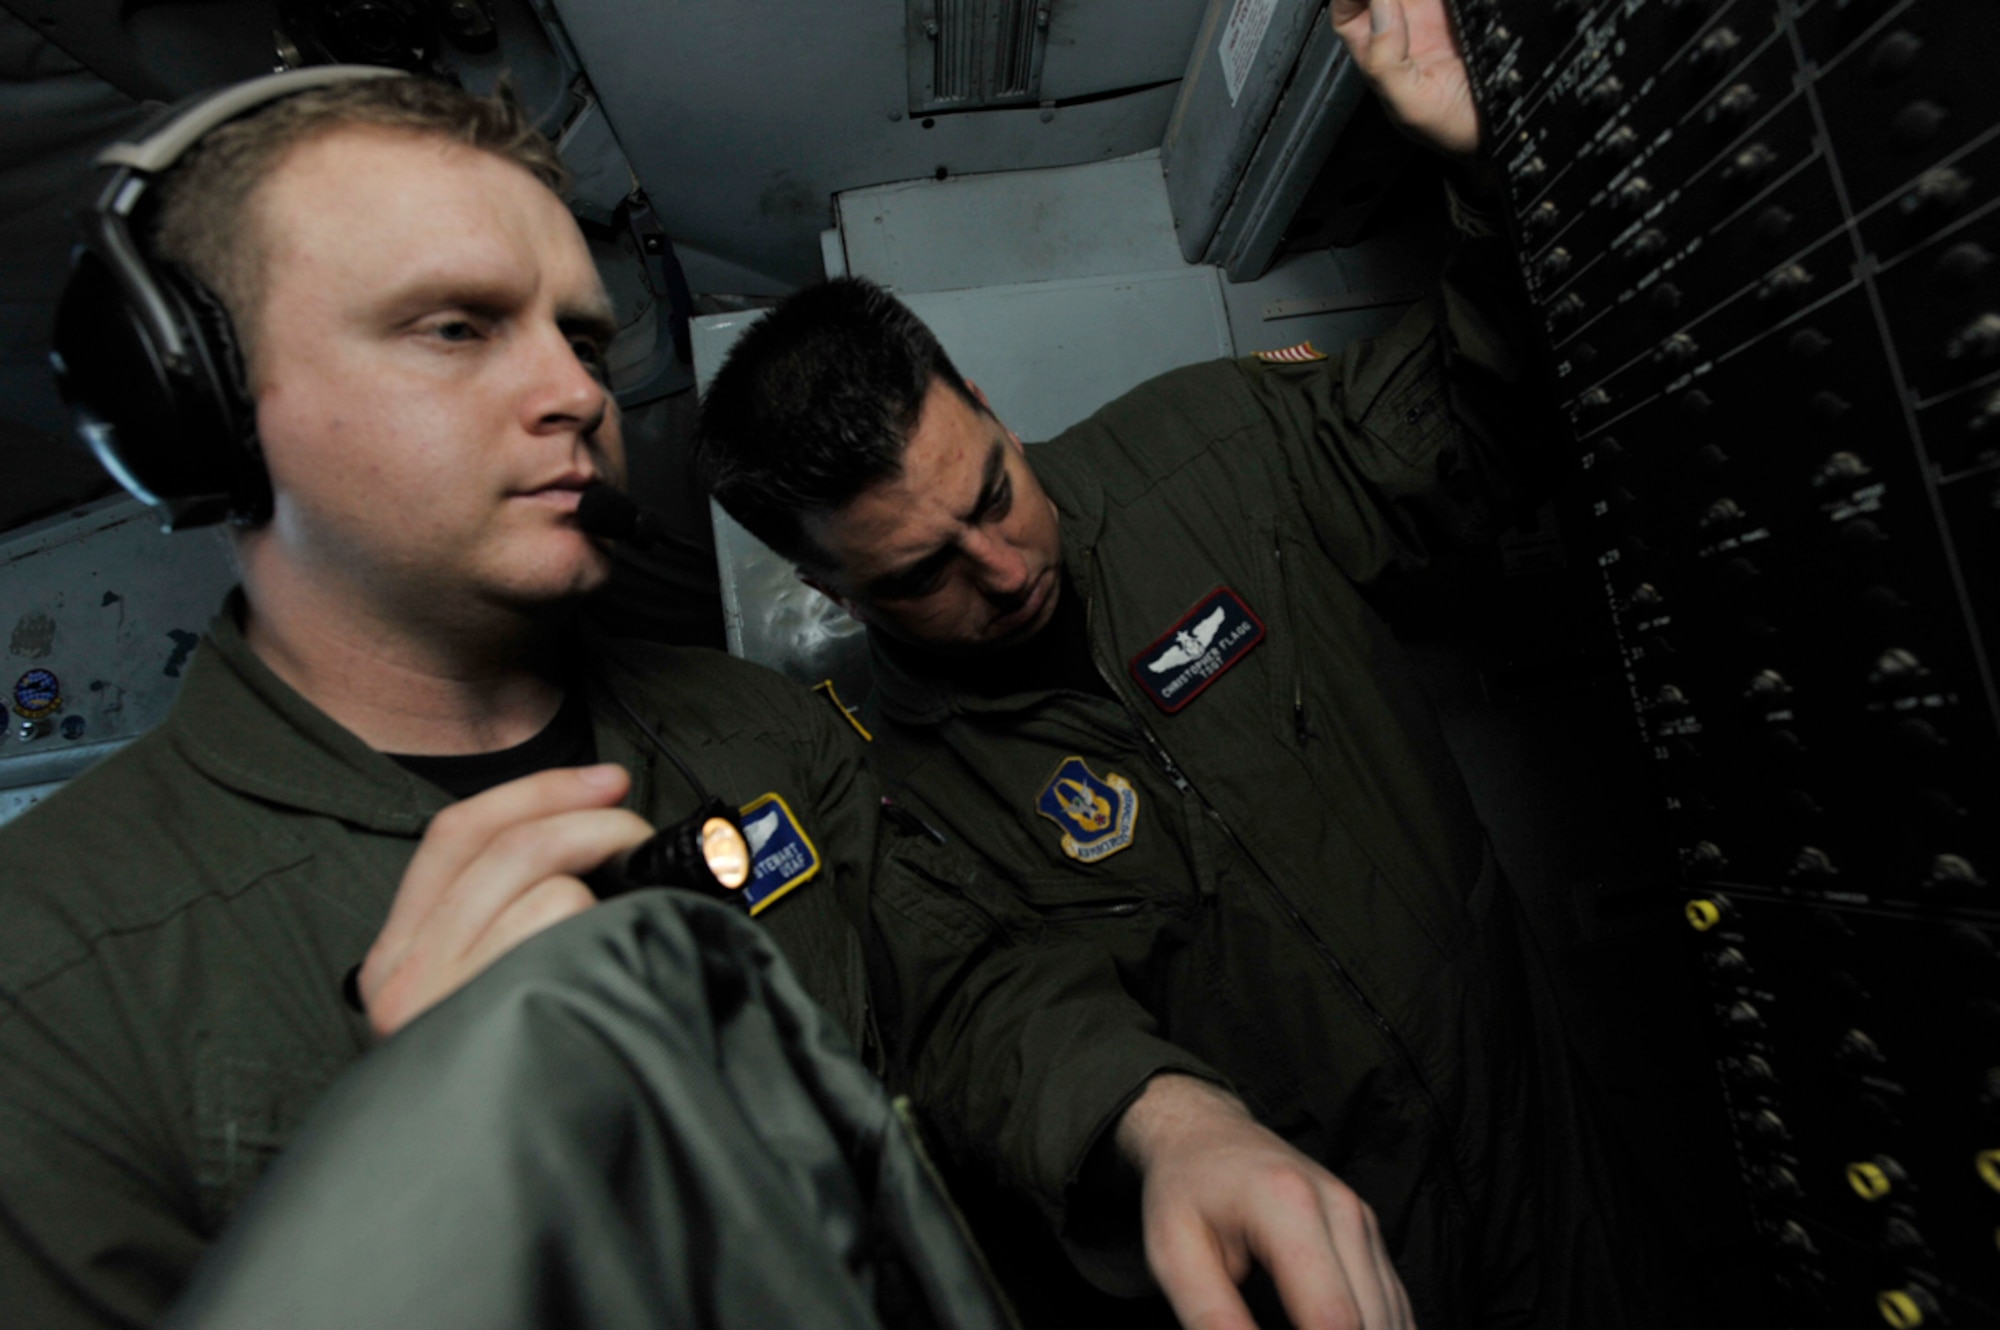 Staff Sgt. Kenny Stewart (left) and Tech. Sgt. Christopher Flagg search for a tripped light circuit on a KC-135 Stratotanker. The two Airmen were part of an aeromedical evacuation training team that included members from the 931st Air Refueling Group and the 514th Aeromedical Evacuation Squadron. Sergeant Stewart is a KC-135 boom operator for the 931st and Sergeant Flagg is an aeromedical evacuation instructor for the 514th. (U.S. Air Force photo/Tech. Sgt. Jason Schaap)